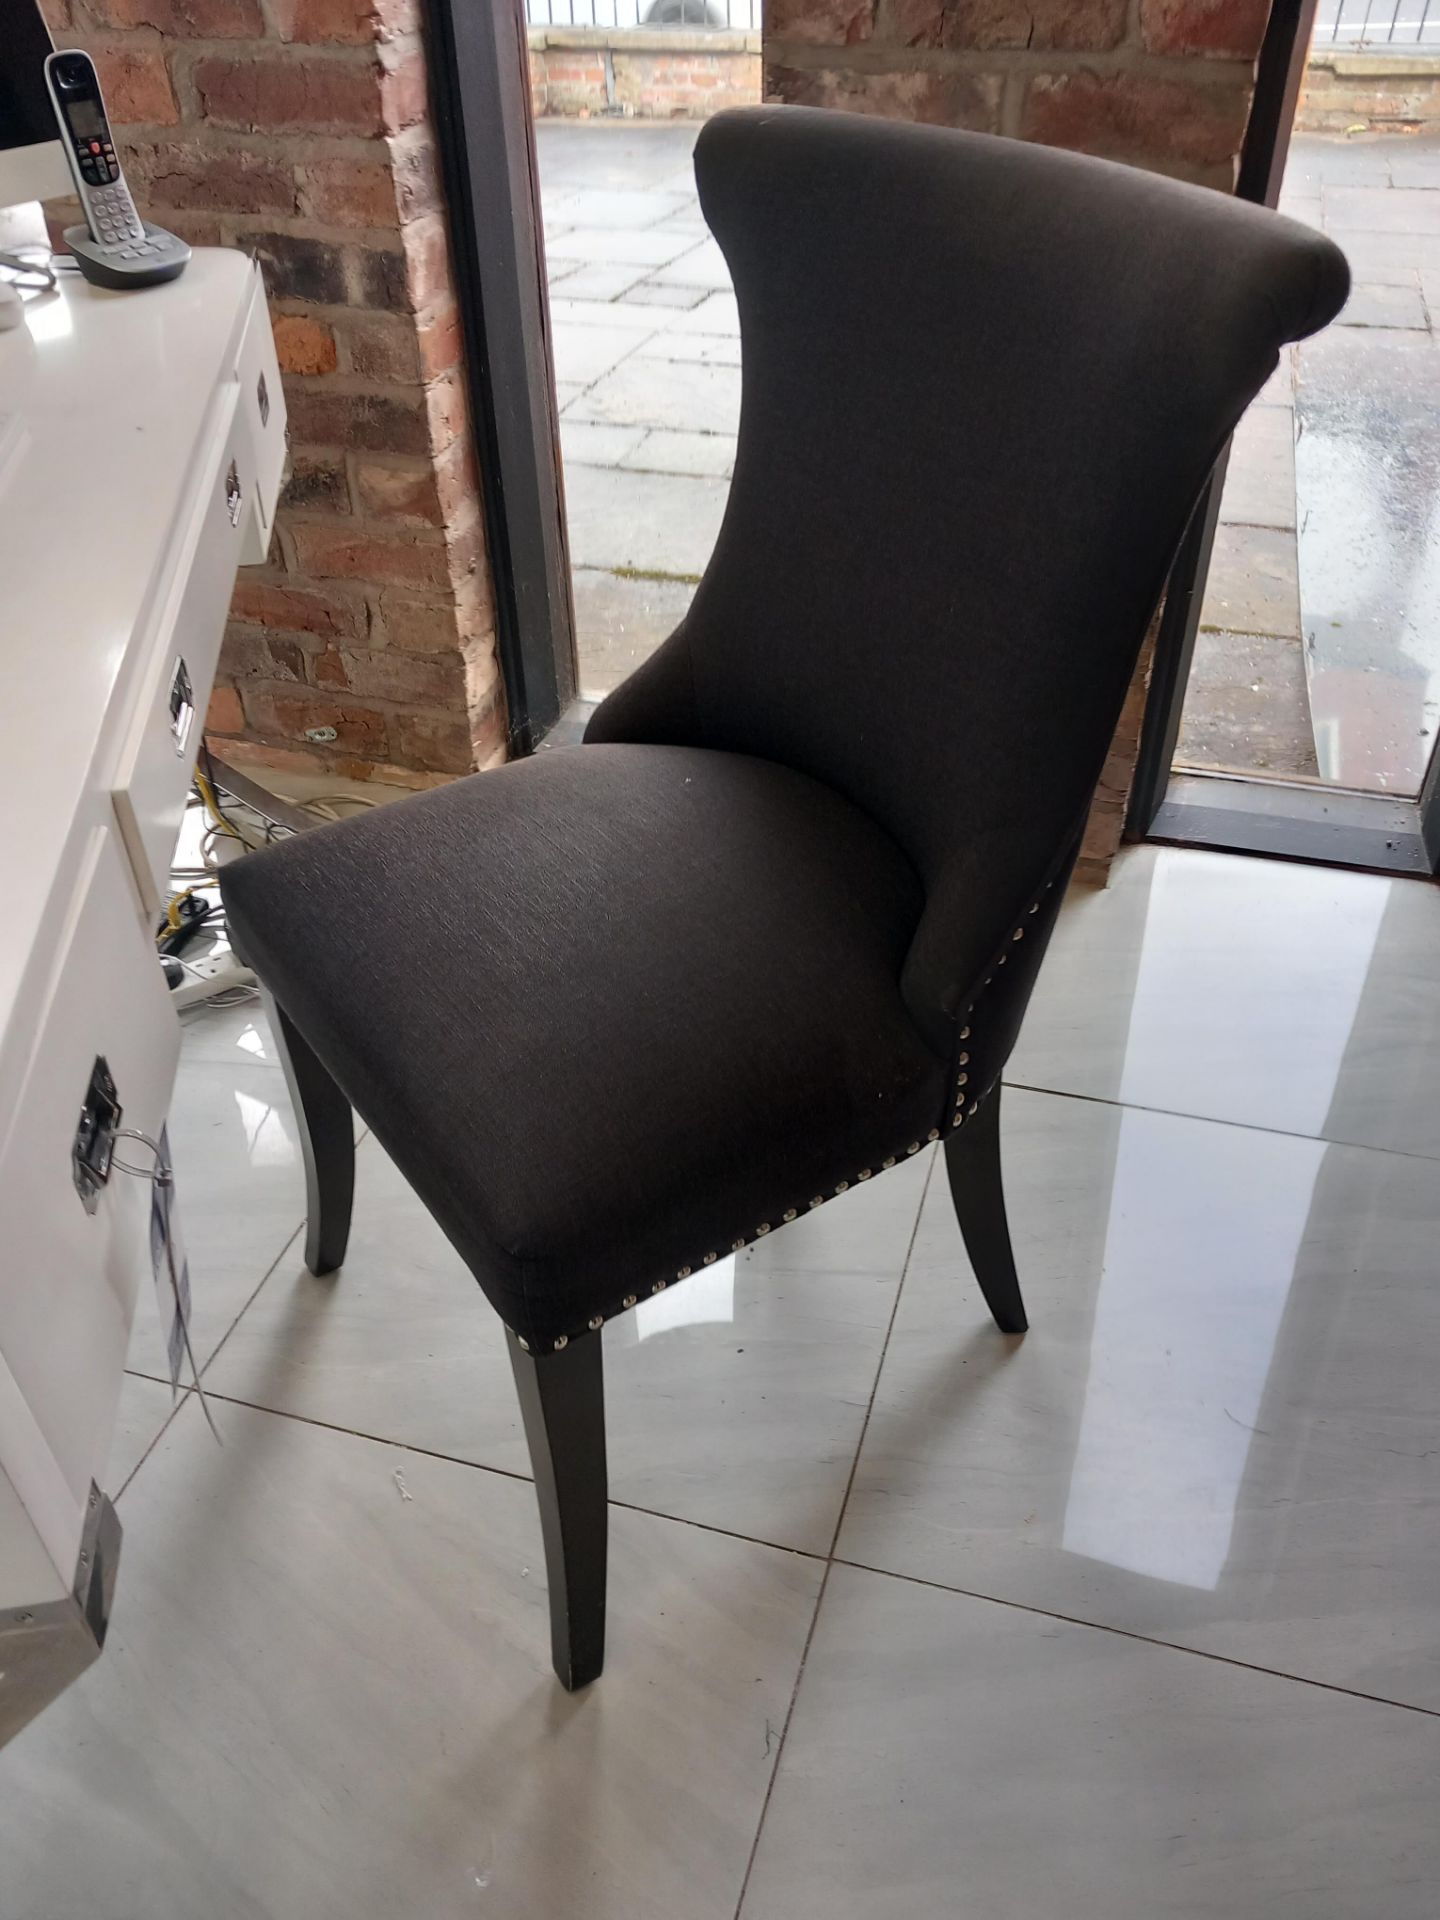 White Desk with Chrome Legs (1400 x 550) with Cushion Chair - Image 2 of 2